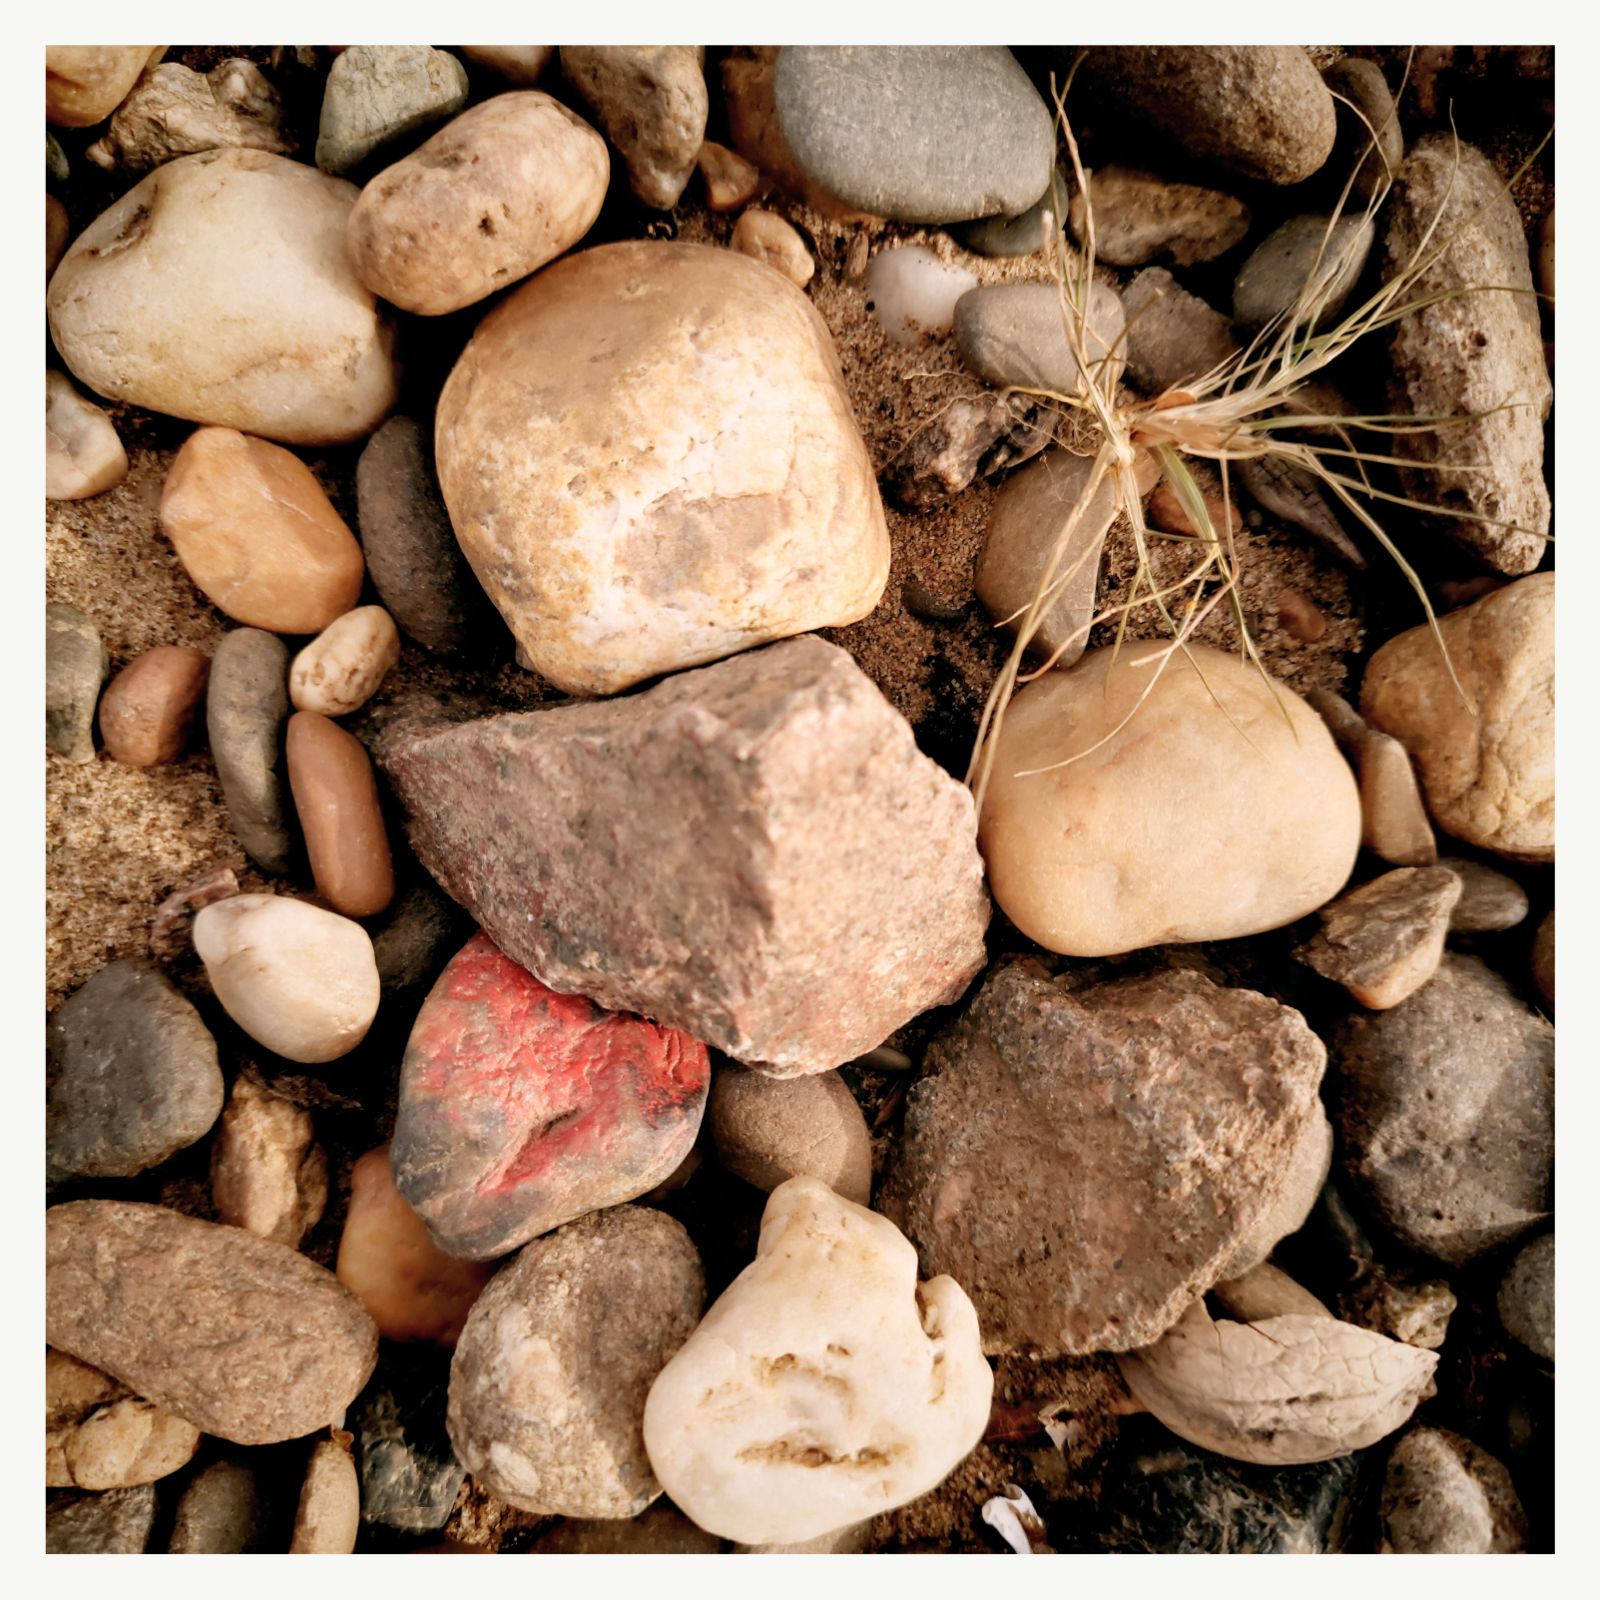 River stones, one coloured red. And a dried piece of some plant.